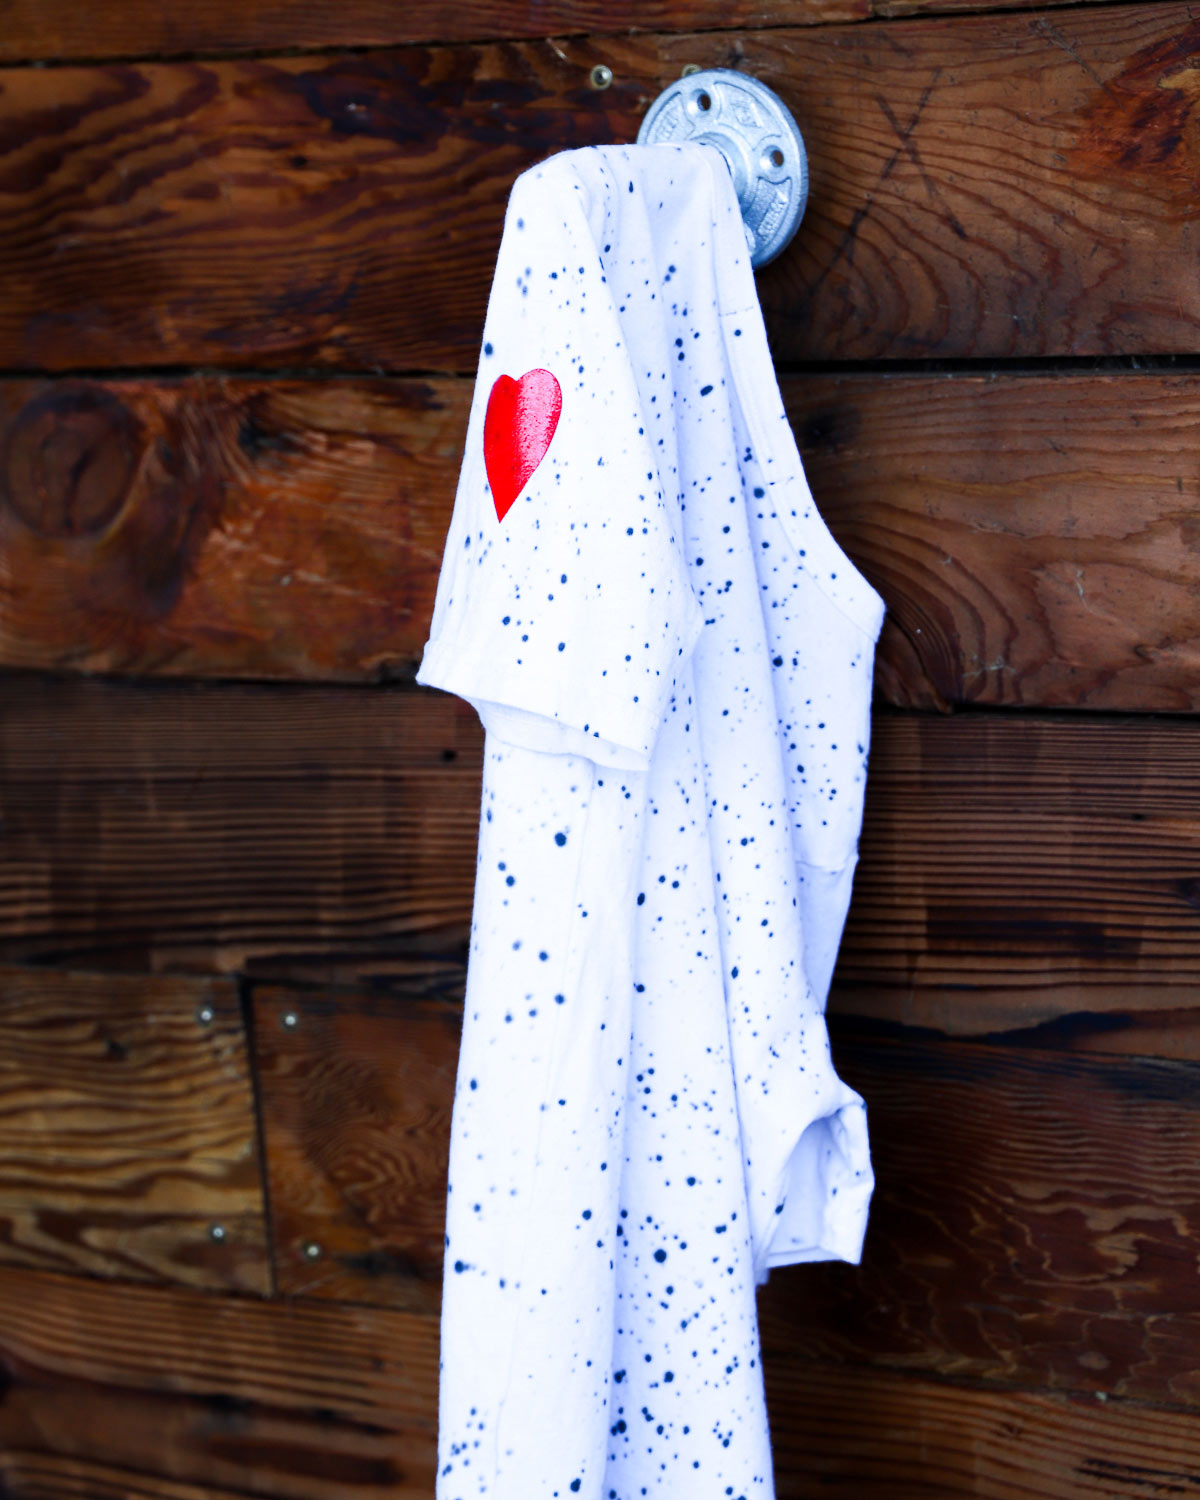 White splatter hand dyed tie dye t-shirt with red heart on wood wall